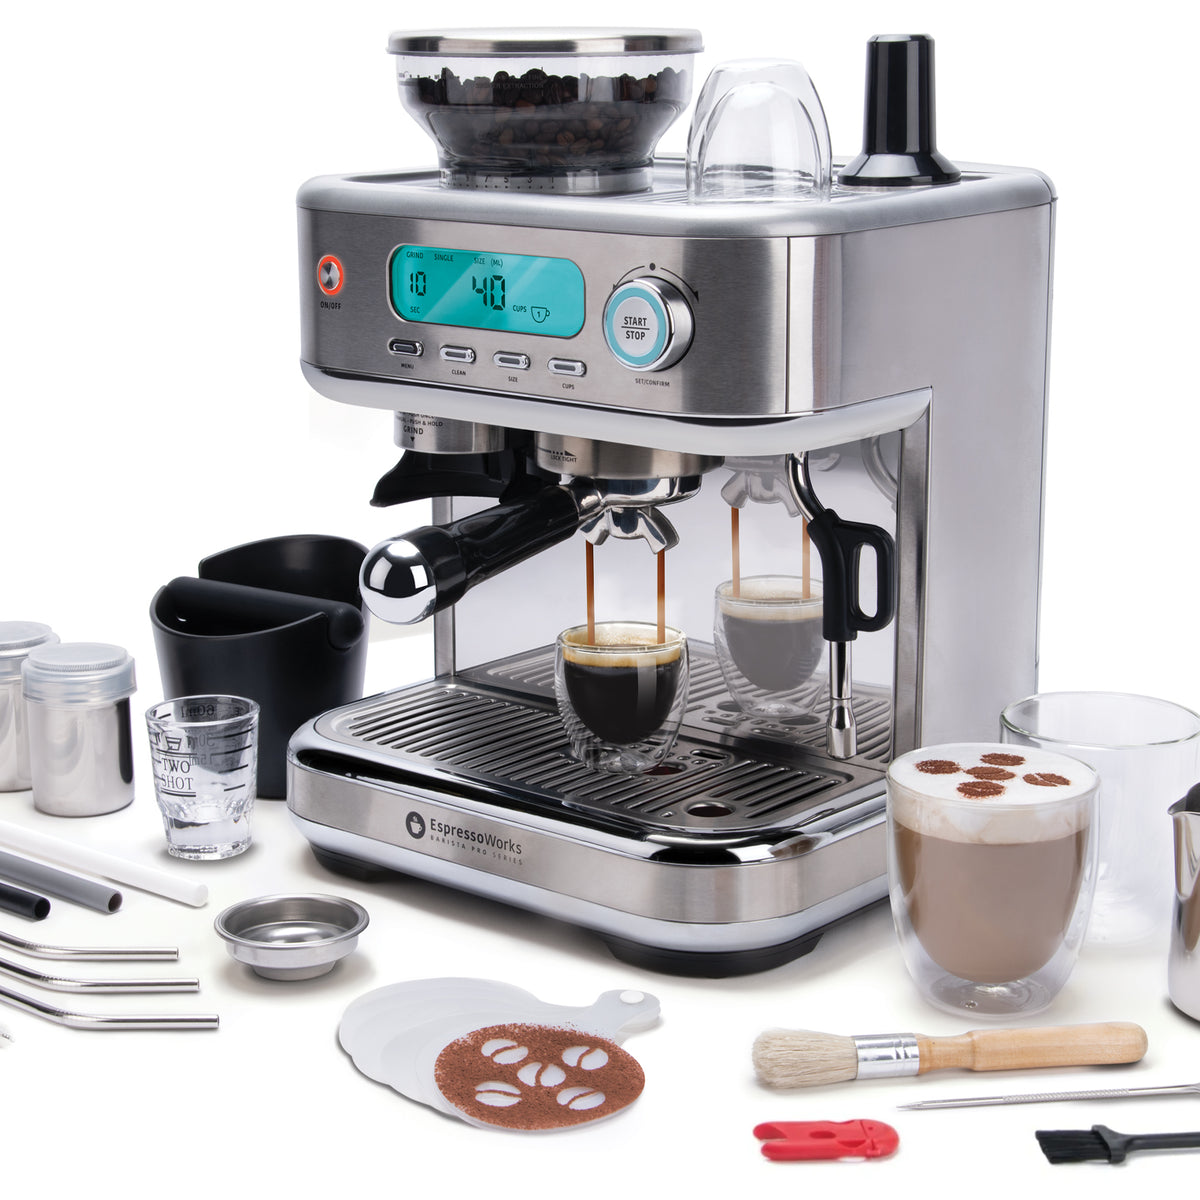 Professional grinding mechanism. Barista grind coffee beans using